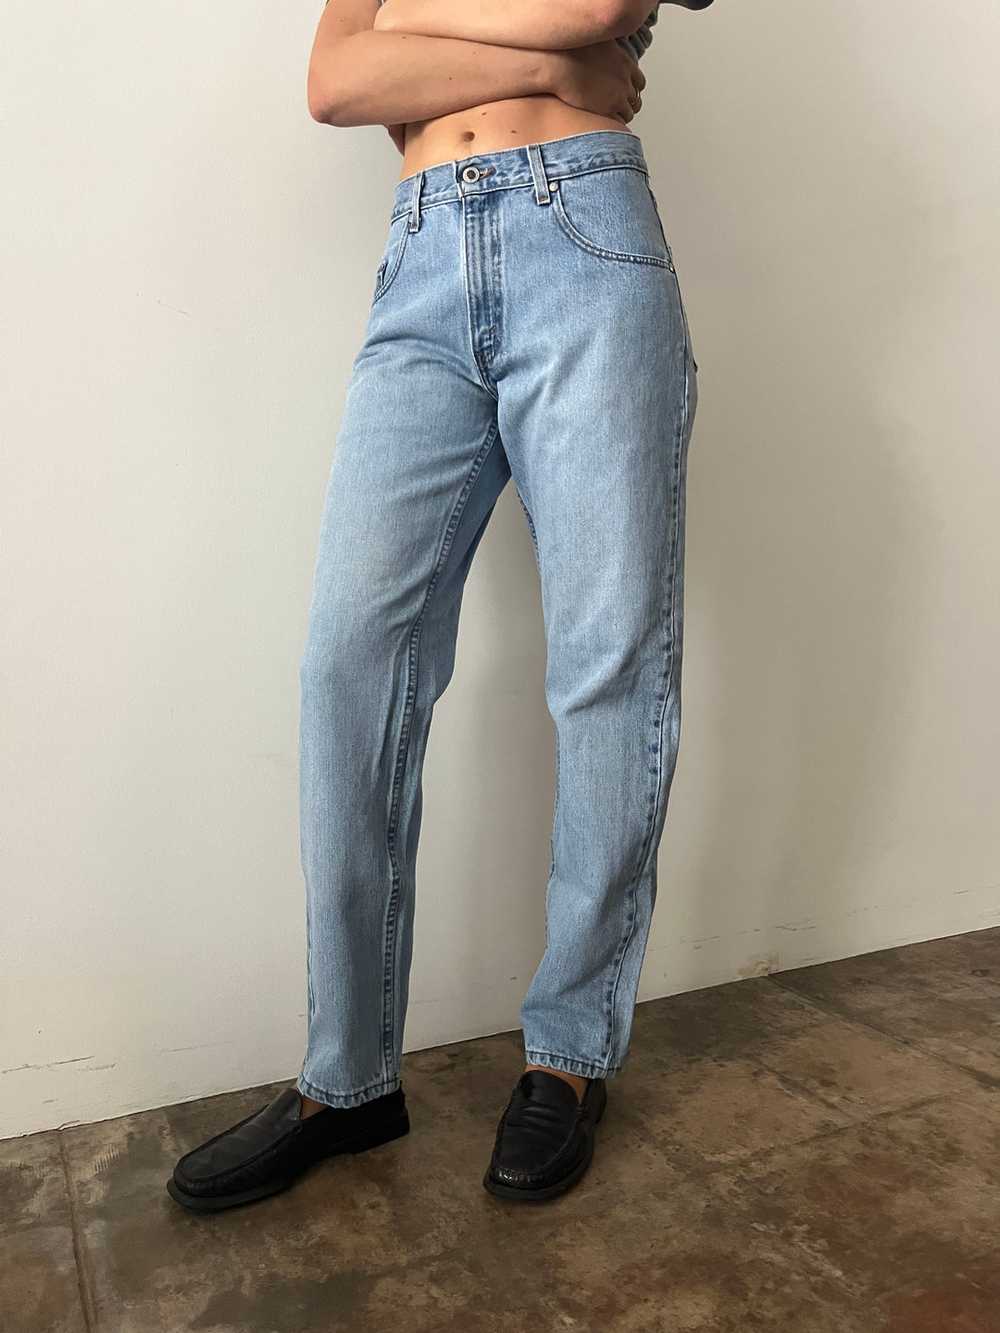 90s Levis Silvertab Jeans - image 3